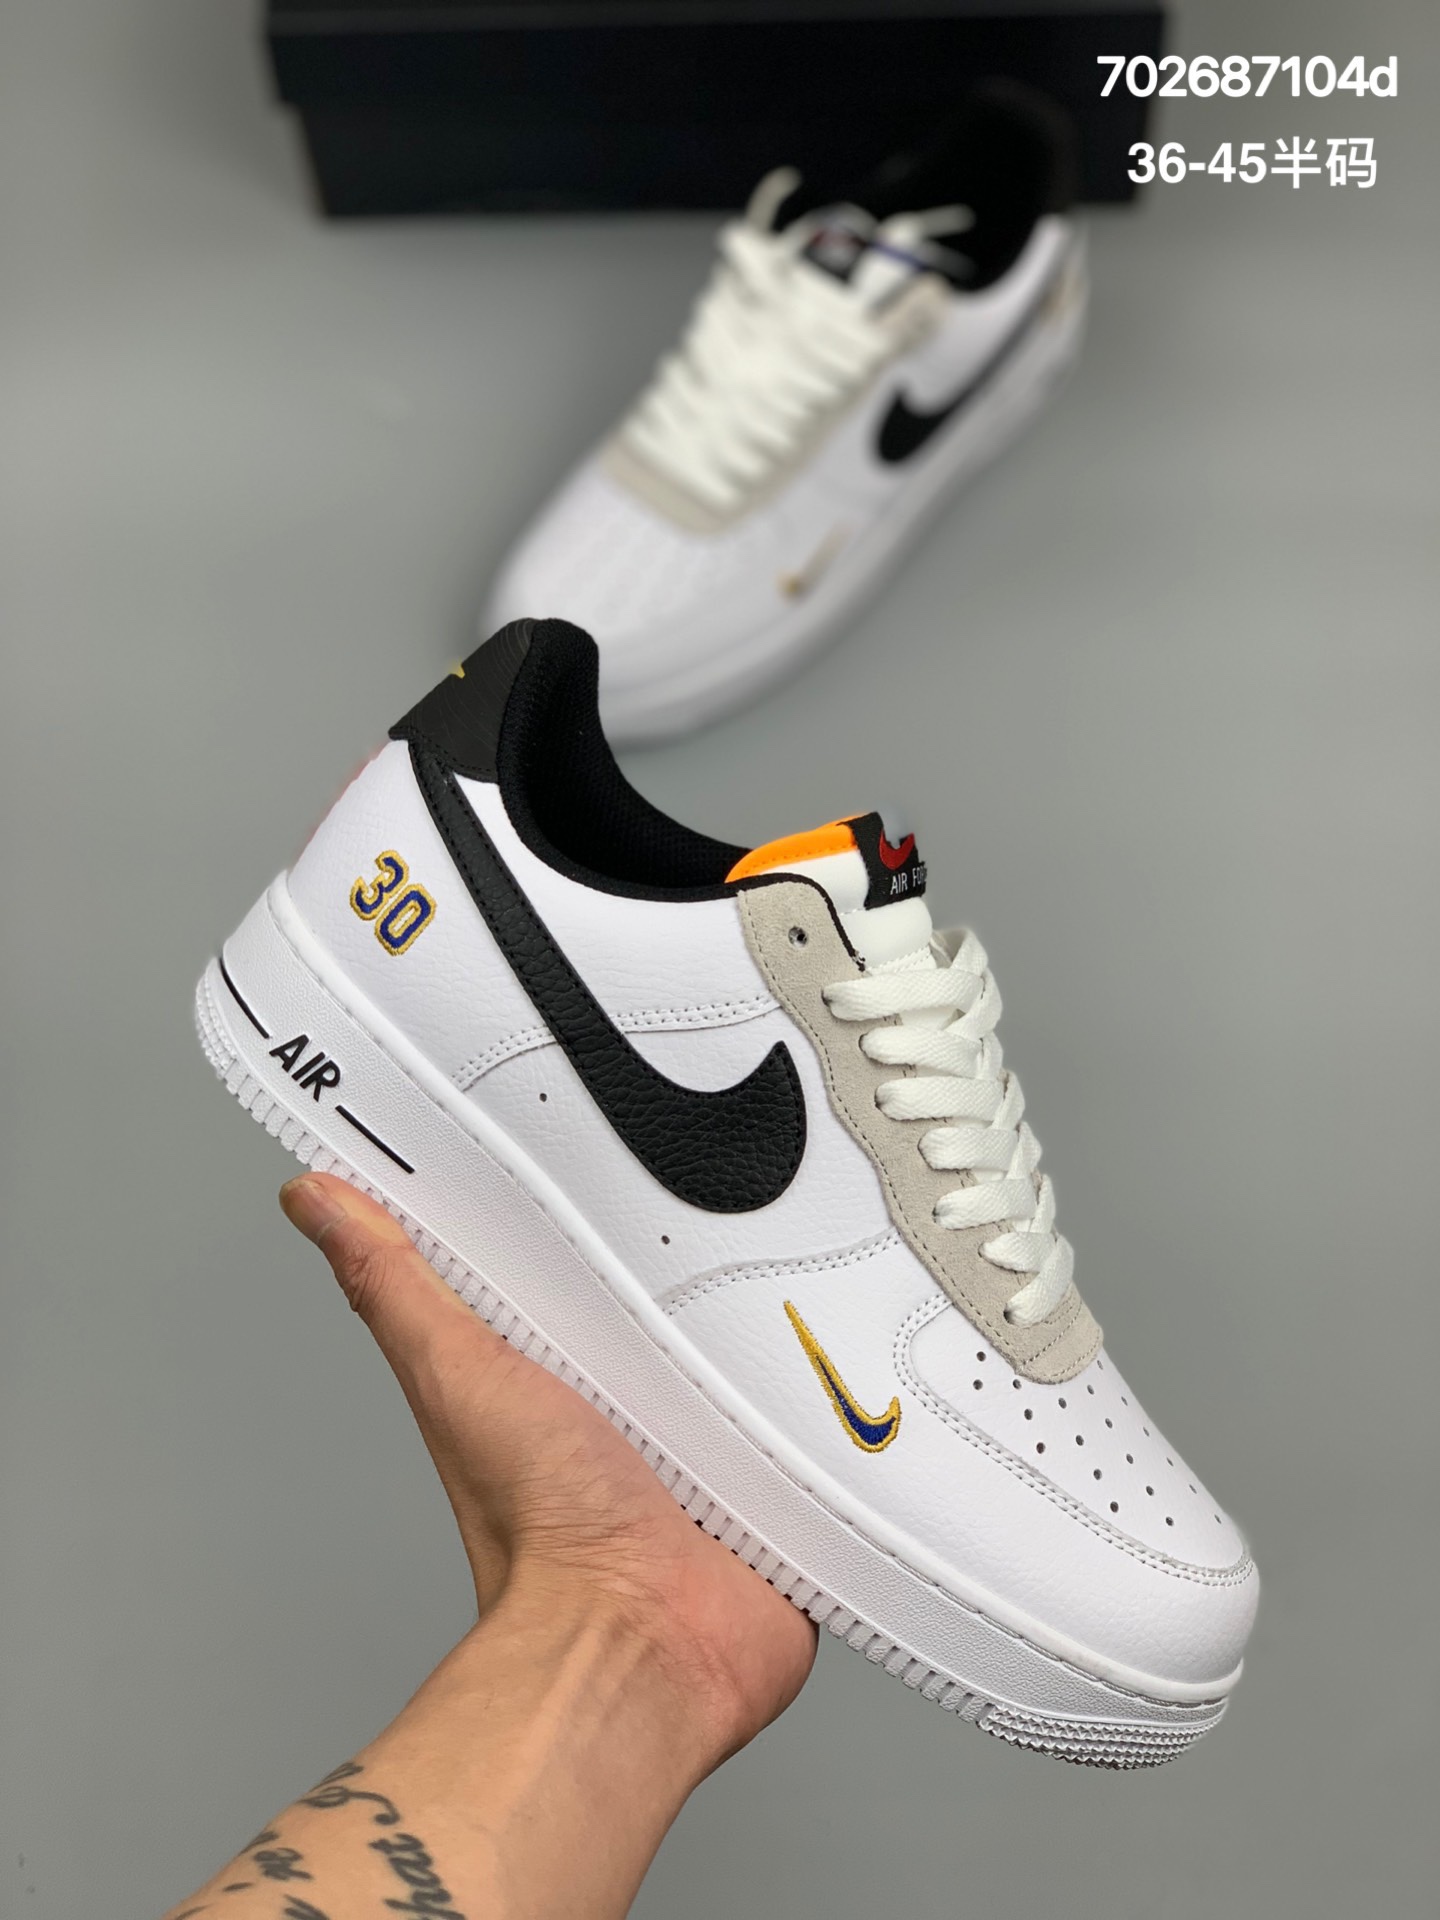 
Nk Air Force 1 Low 